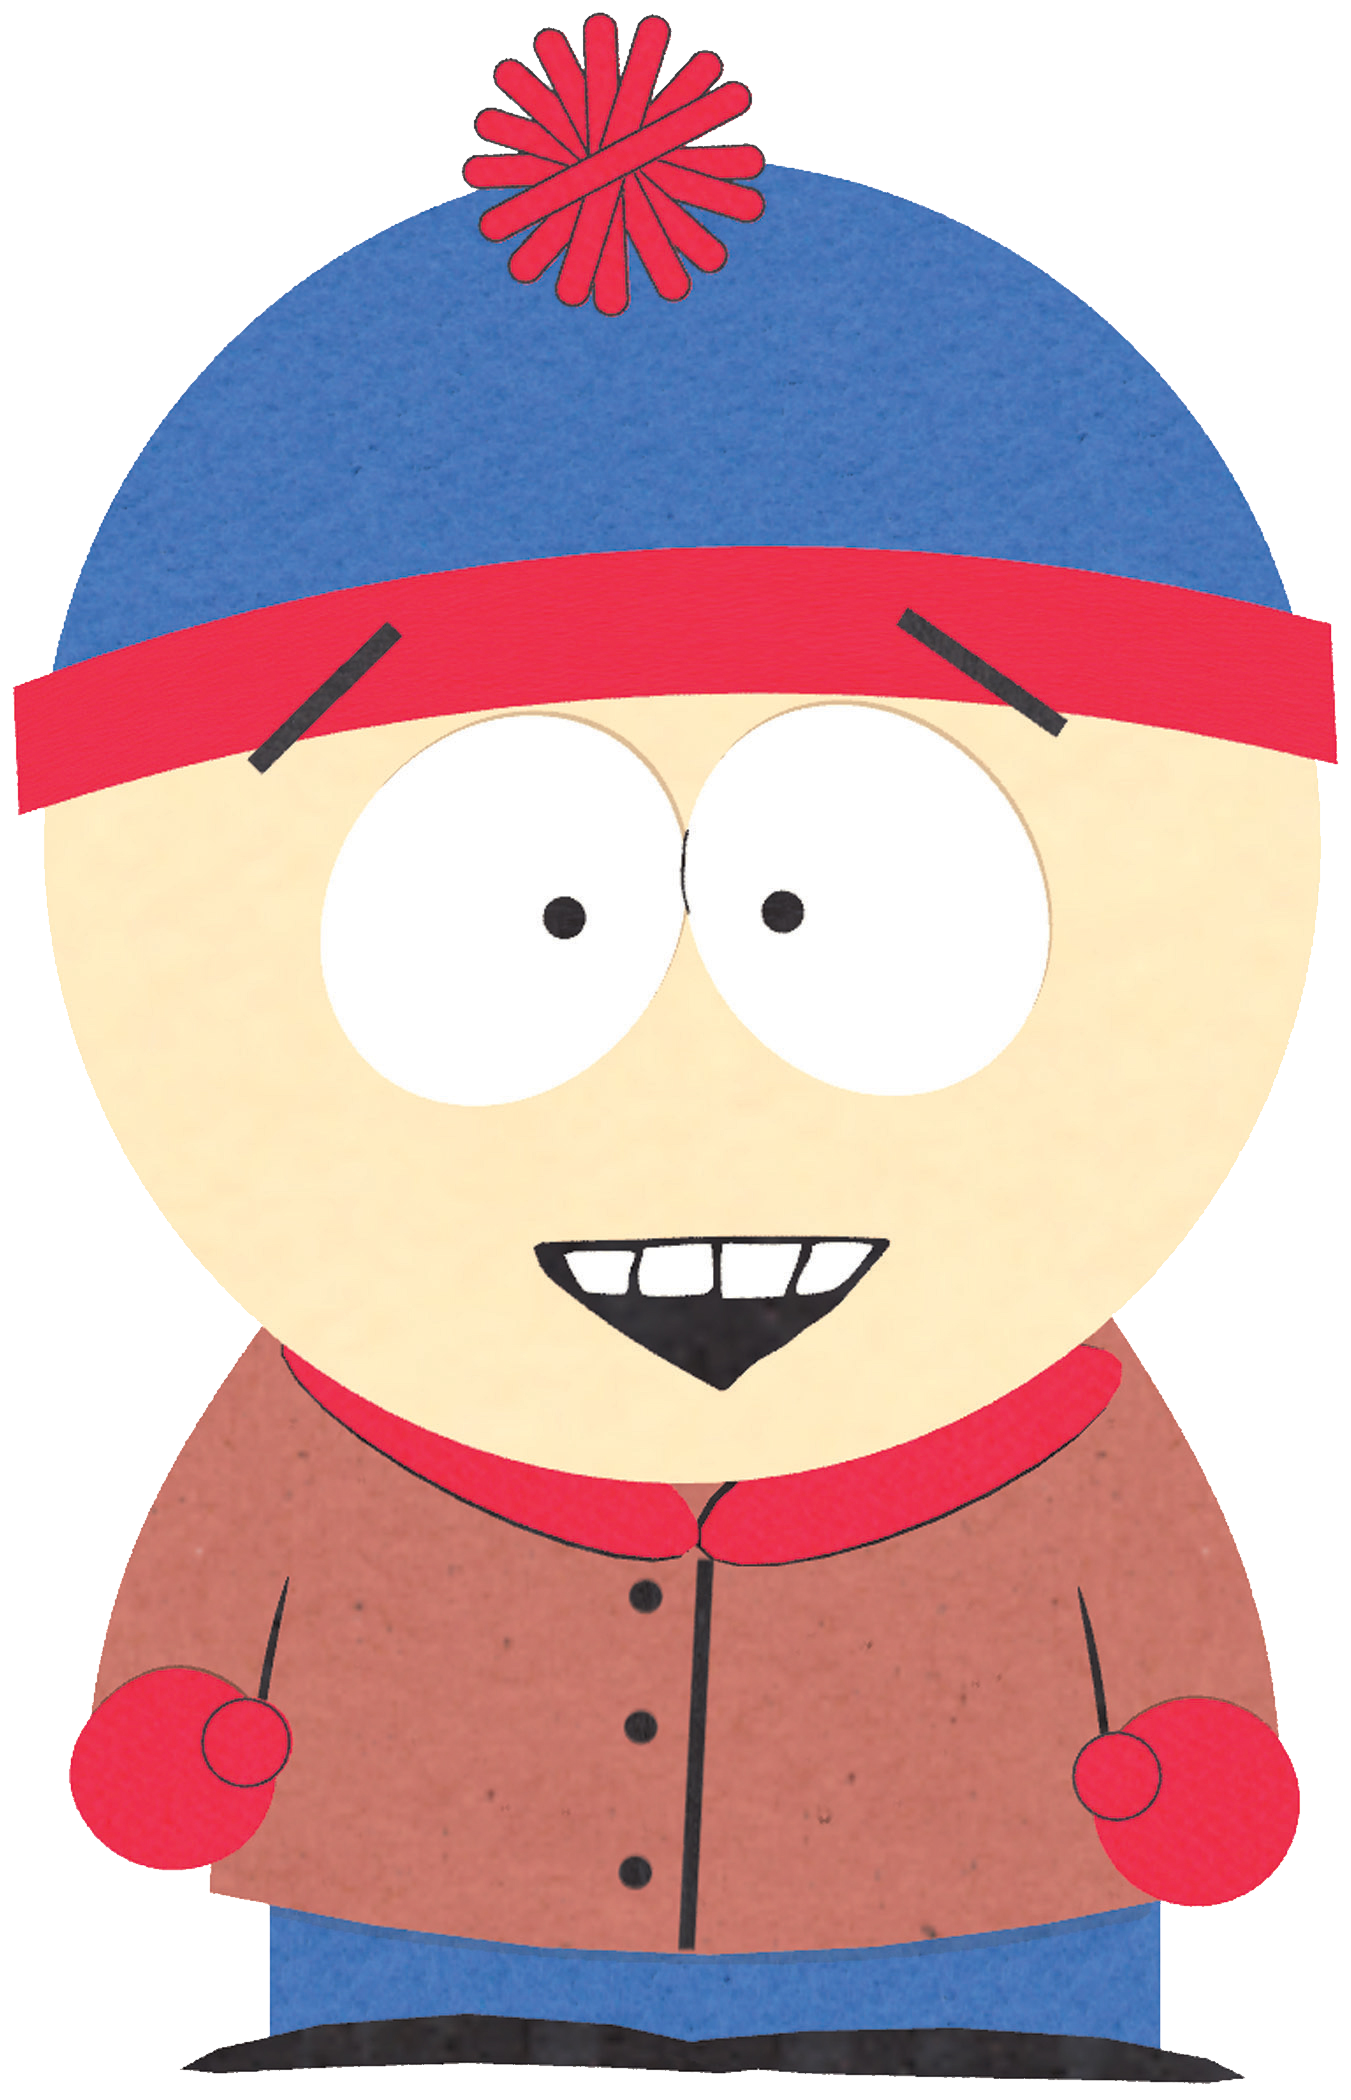 Image Stanmarshpng South Park Archives Fandom Powered By Wikia 